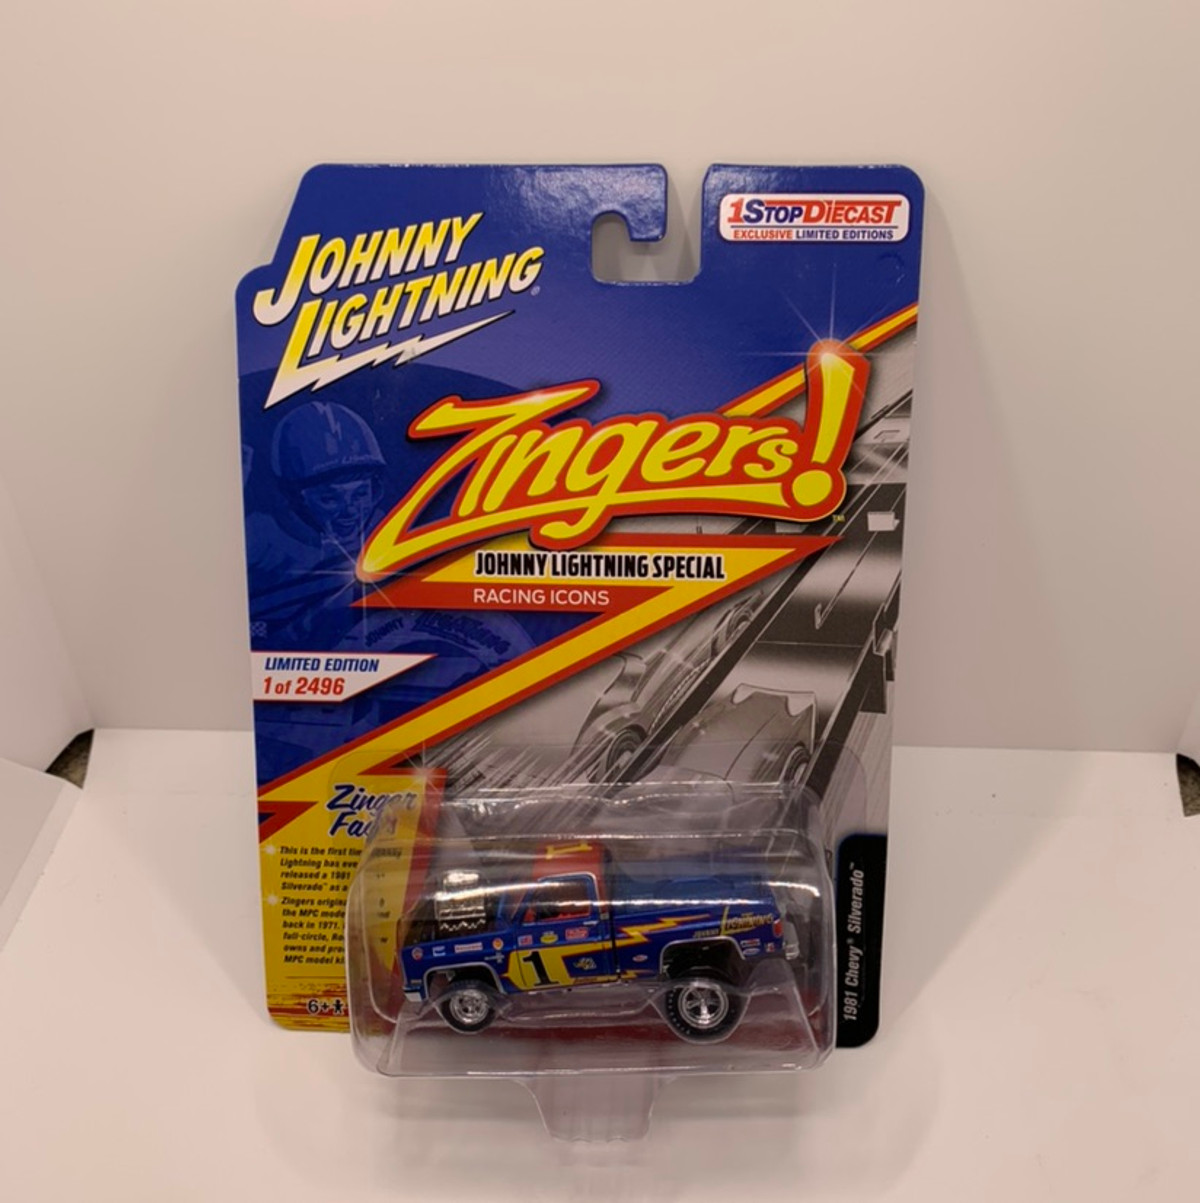 Johnny Lightning 1StopDiecast Exclusive Zingers Racing Legends 1981 Chevy Silverado Limited Edition 2496 Produced 